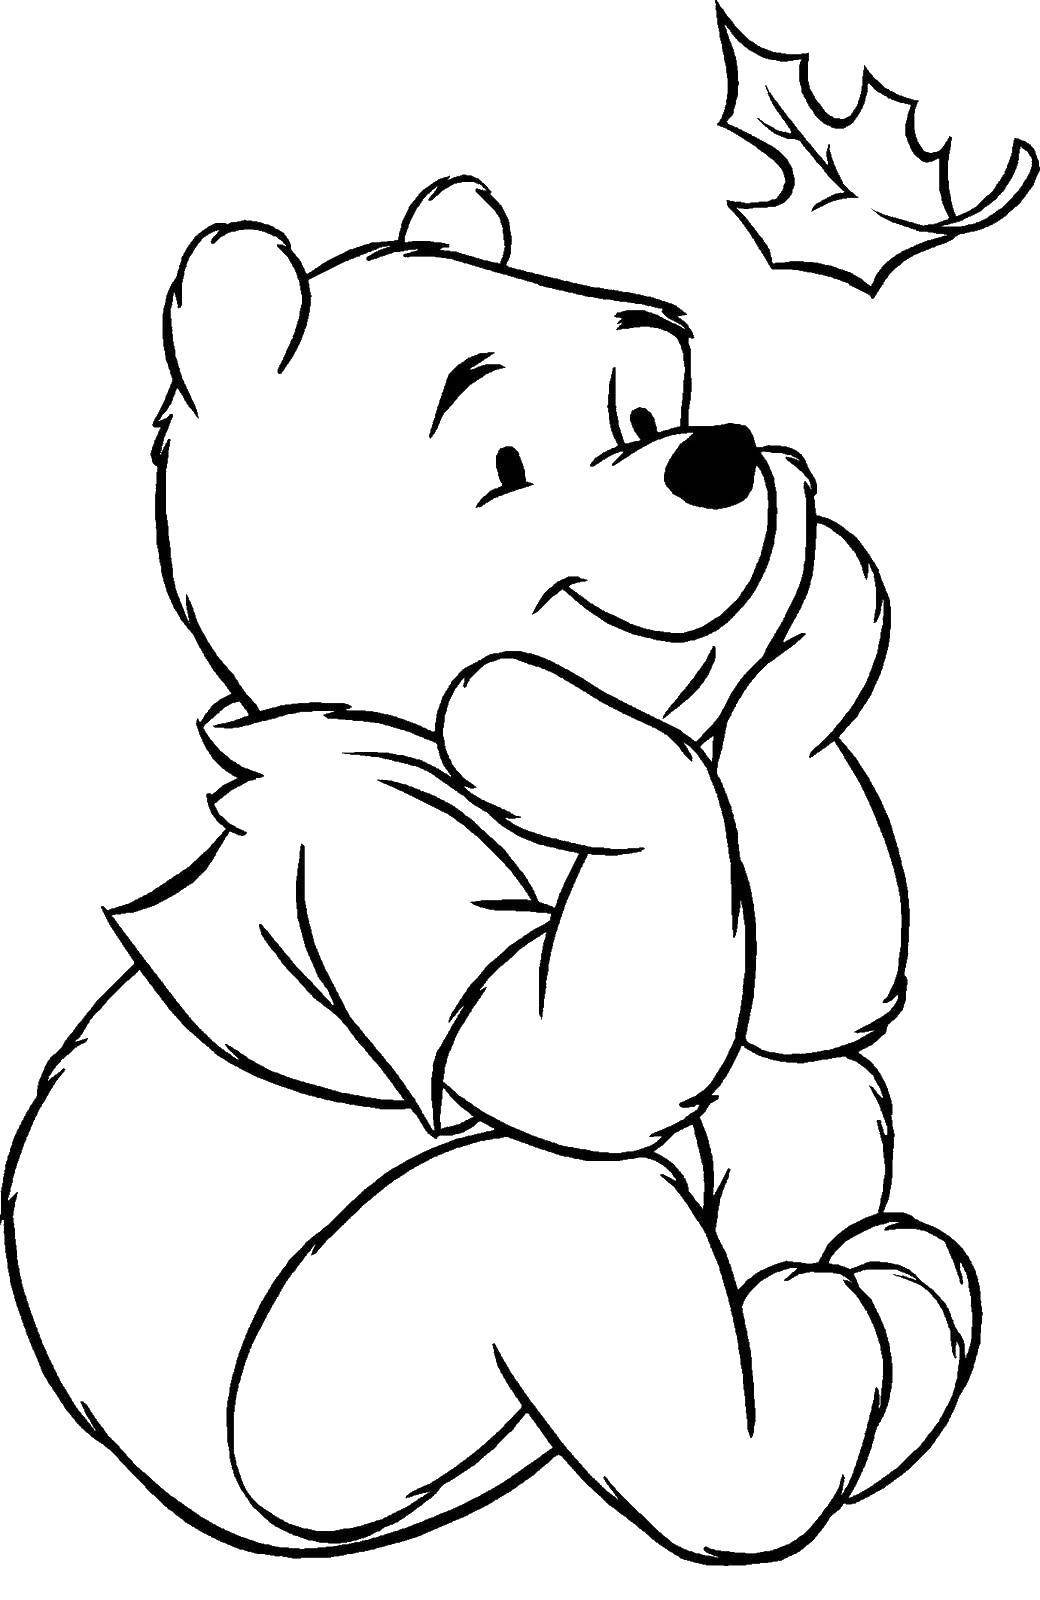 Coloring Vinnie with a sheet. Category Disney coloring pages. Tags:  Winnie, leaf, bear.